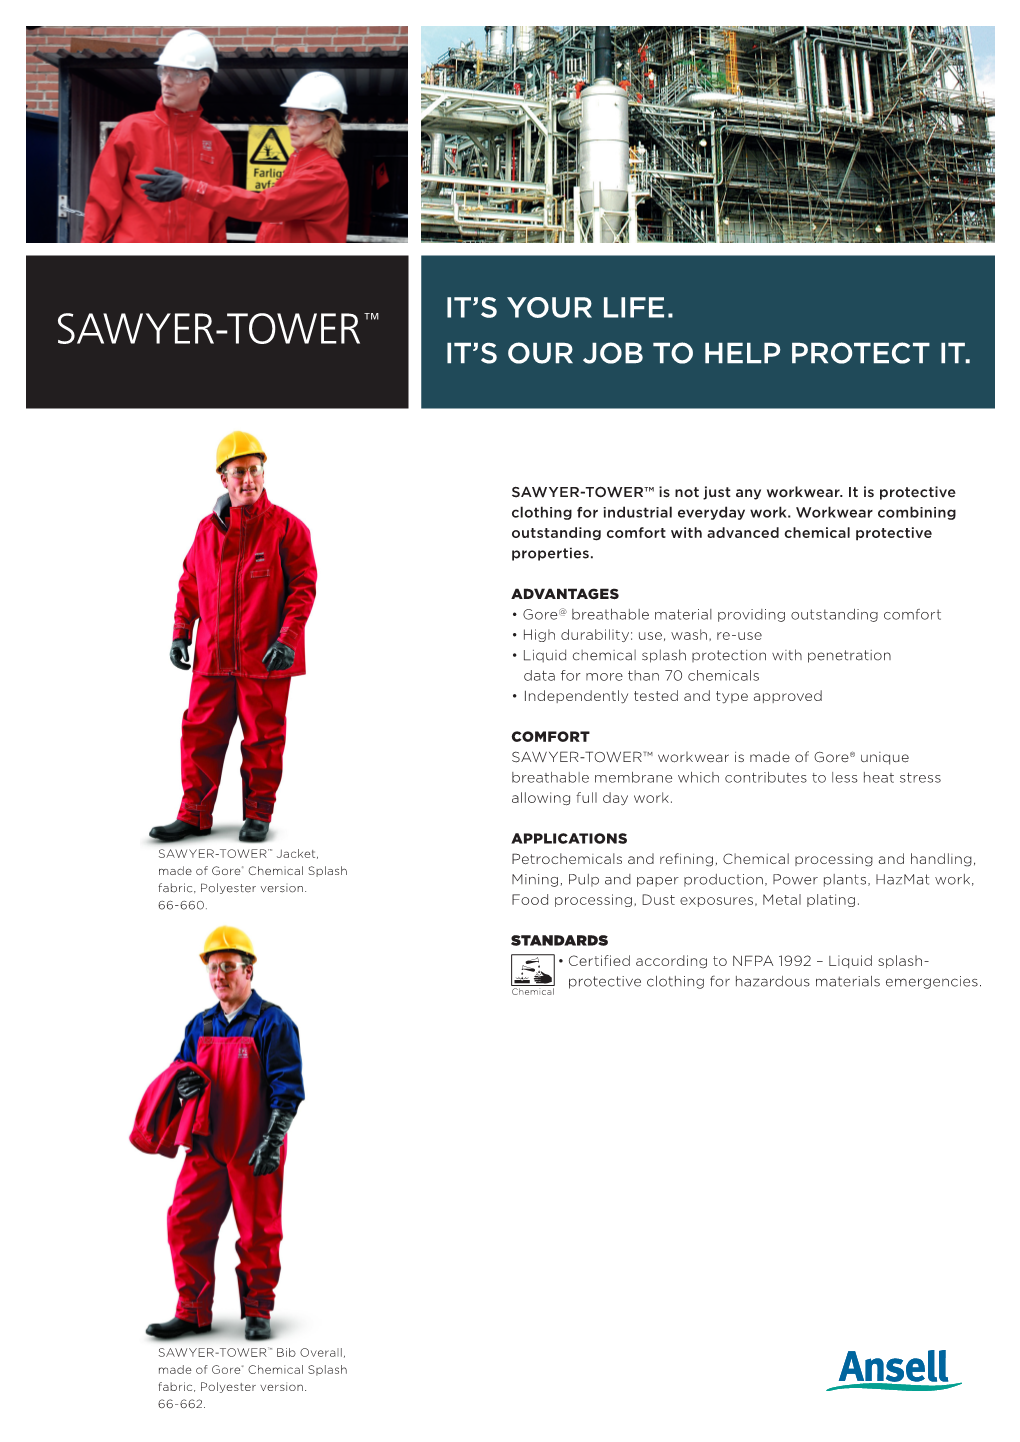 SAWYER-TOWER™ Is Not Just Any Workwear